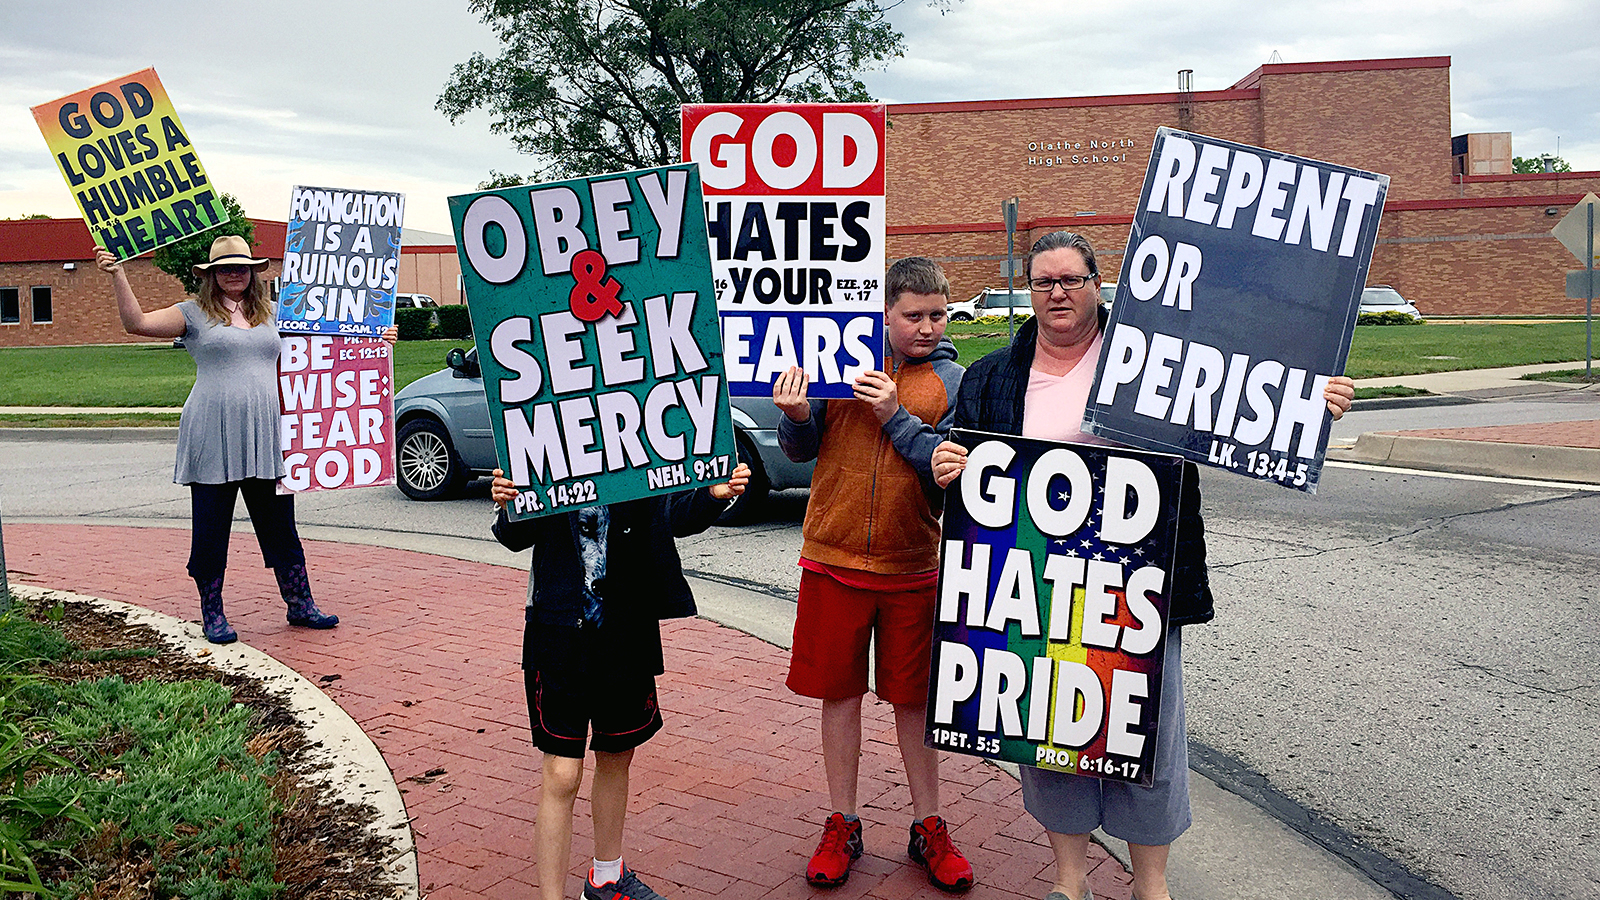 They're still here: The curious evolution of Westboro Baptist Church.